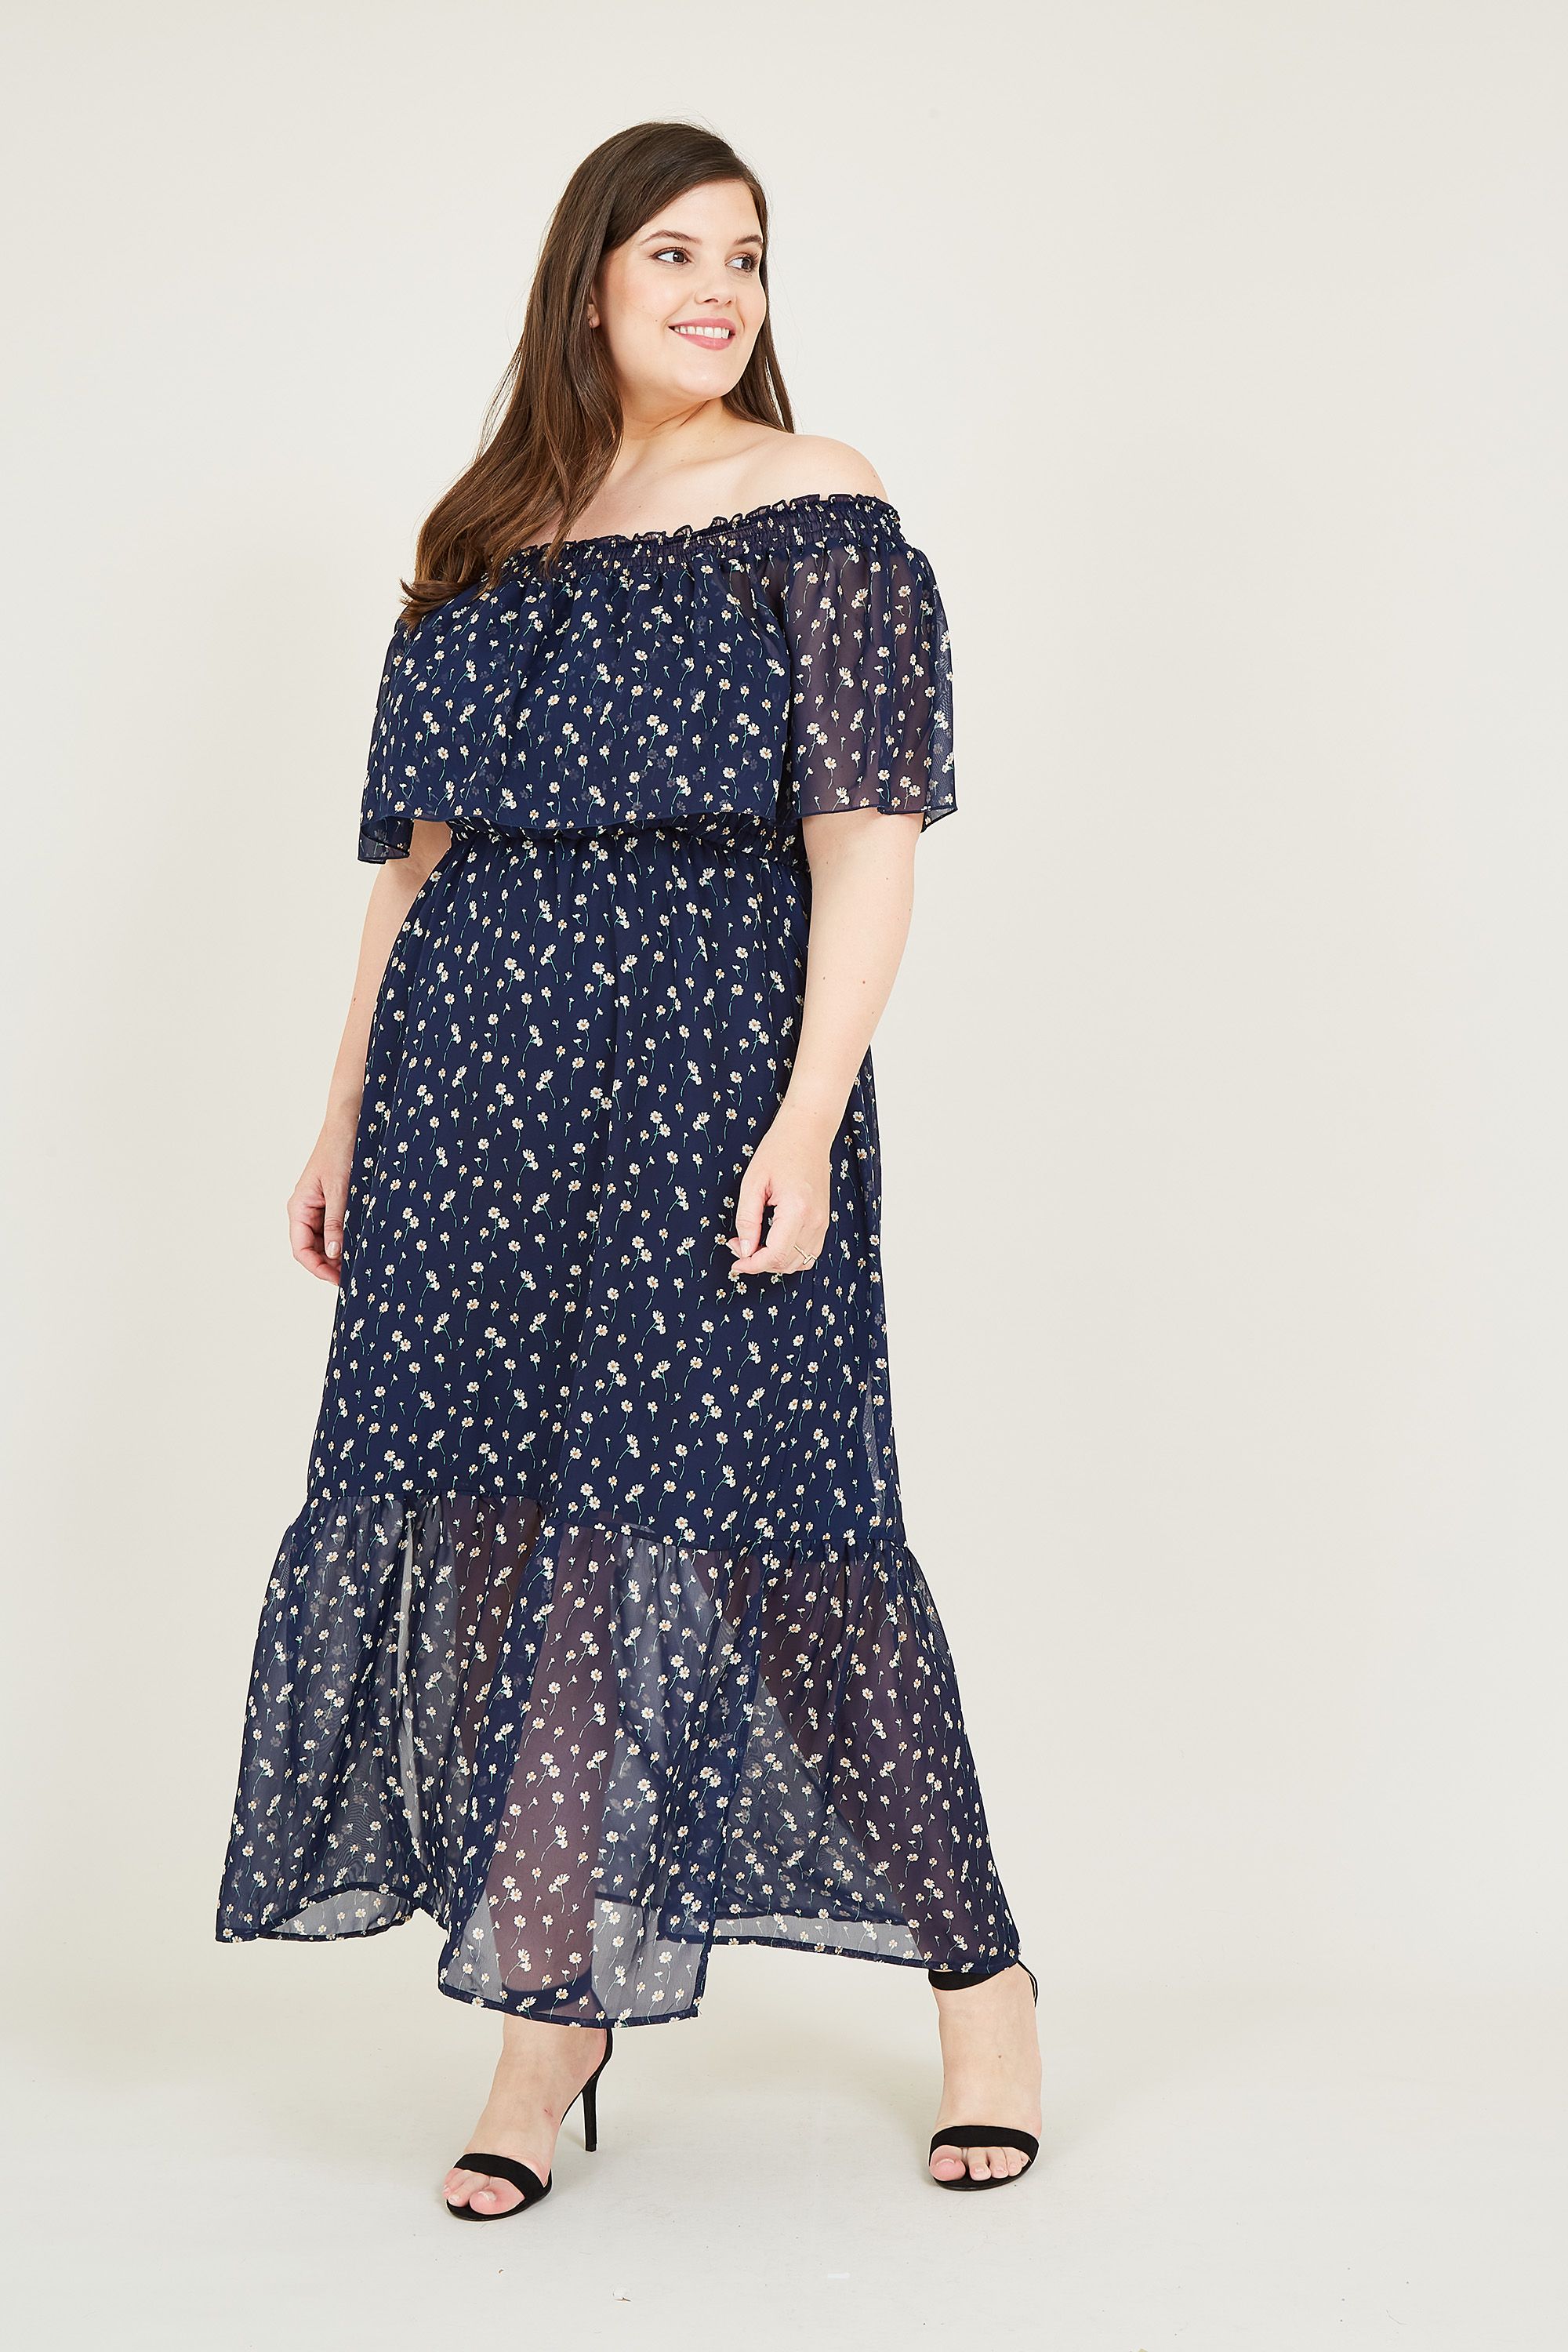 Expertly cut from light chiffon fabric, this Plus Size Daisy Bardot Maxi Dress is the perfect piece for summer. Designed with a comfortable elasticated neckline, it's designed with a soft lining and beautiful frill detailing. The peplum hemline adds sway to give your weekend look an elegant upgrade.